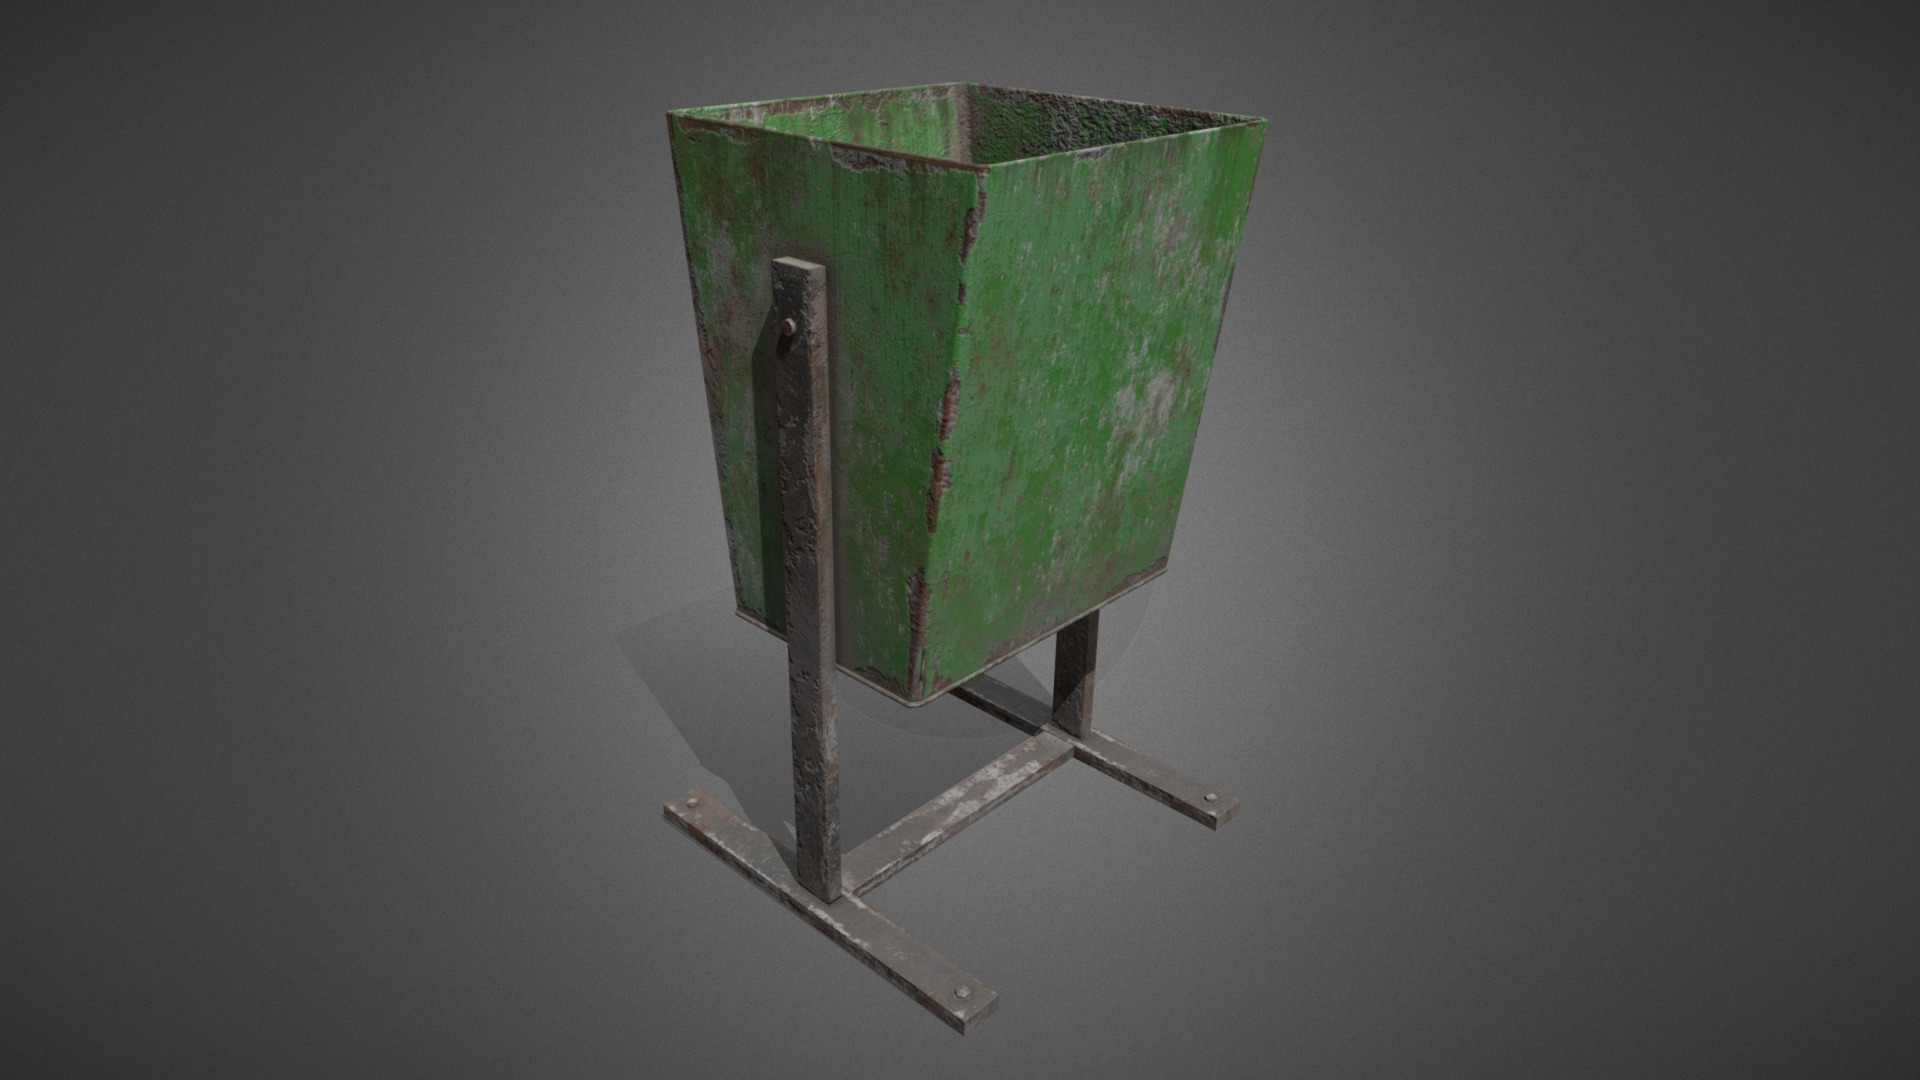 3D model Trash Can - This is a 3D model of the Trash Can. The 3D model is about a green and black birdhouse.